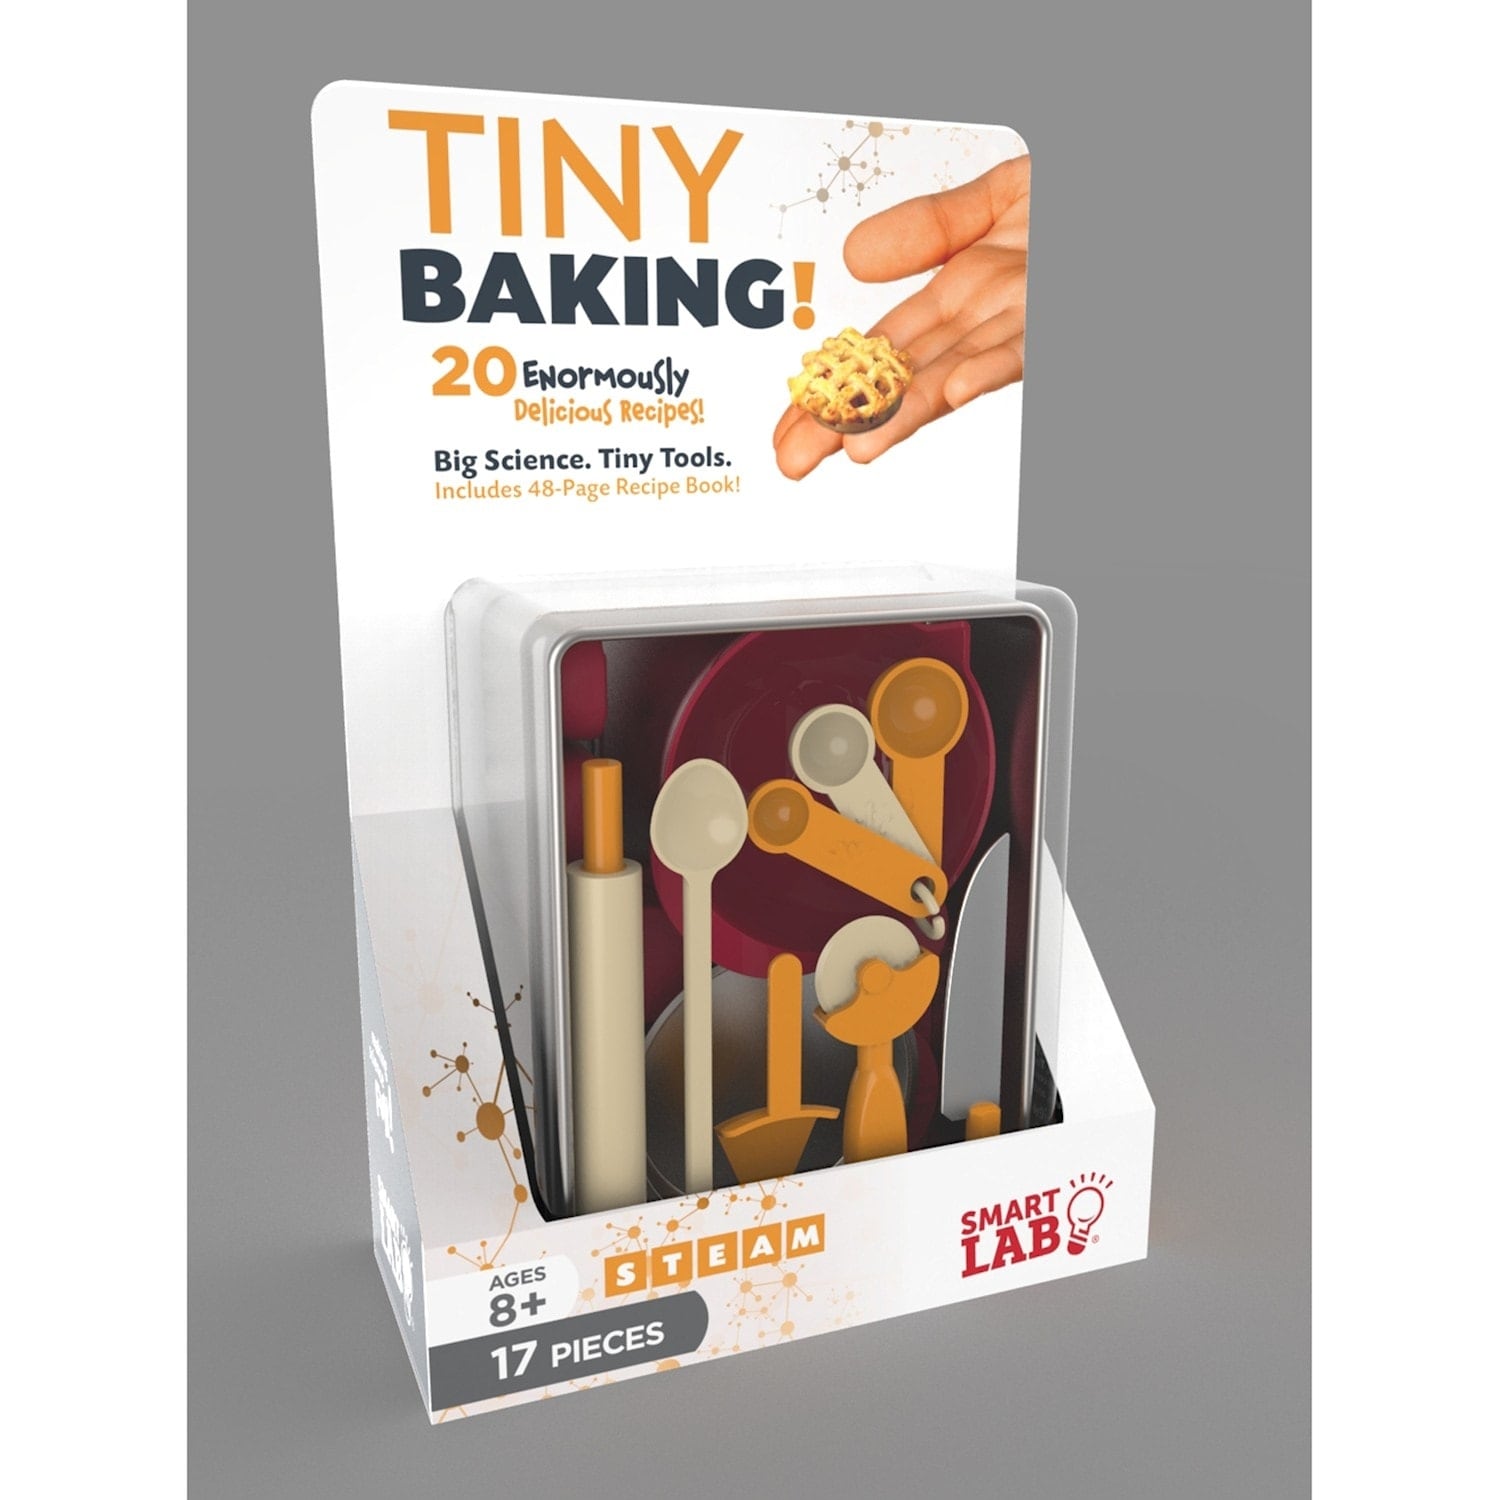 https://ak1.ostkcdn.com/images/products/is/images/direct/d8433d955424c5a64a5547769b5e1afb45207f0c/Quayside-Hachette-Book-Tiny-Baking-Set---17-Piece-Miniature-Cooking-Ut.jpg